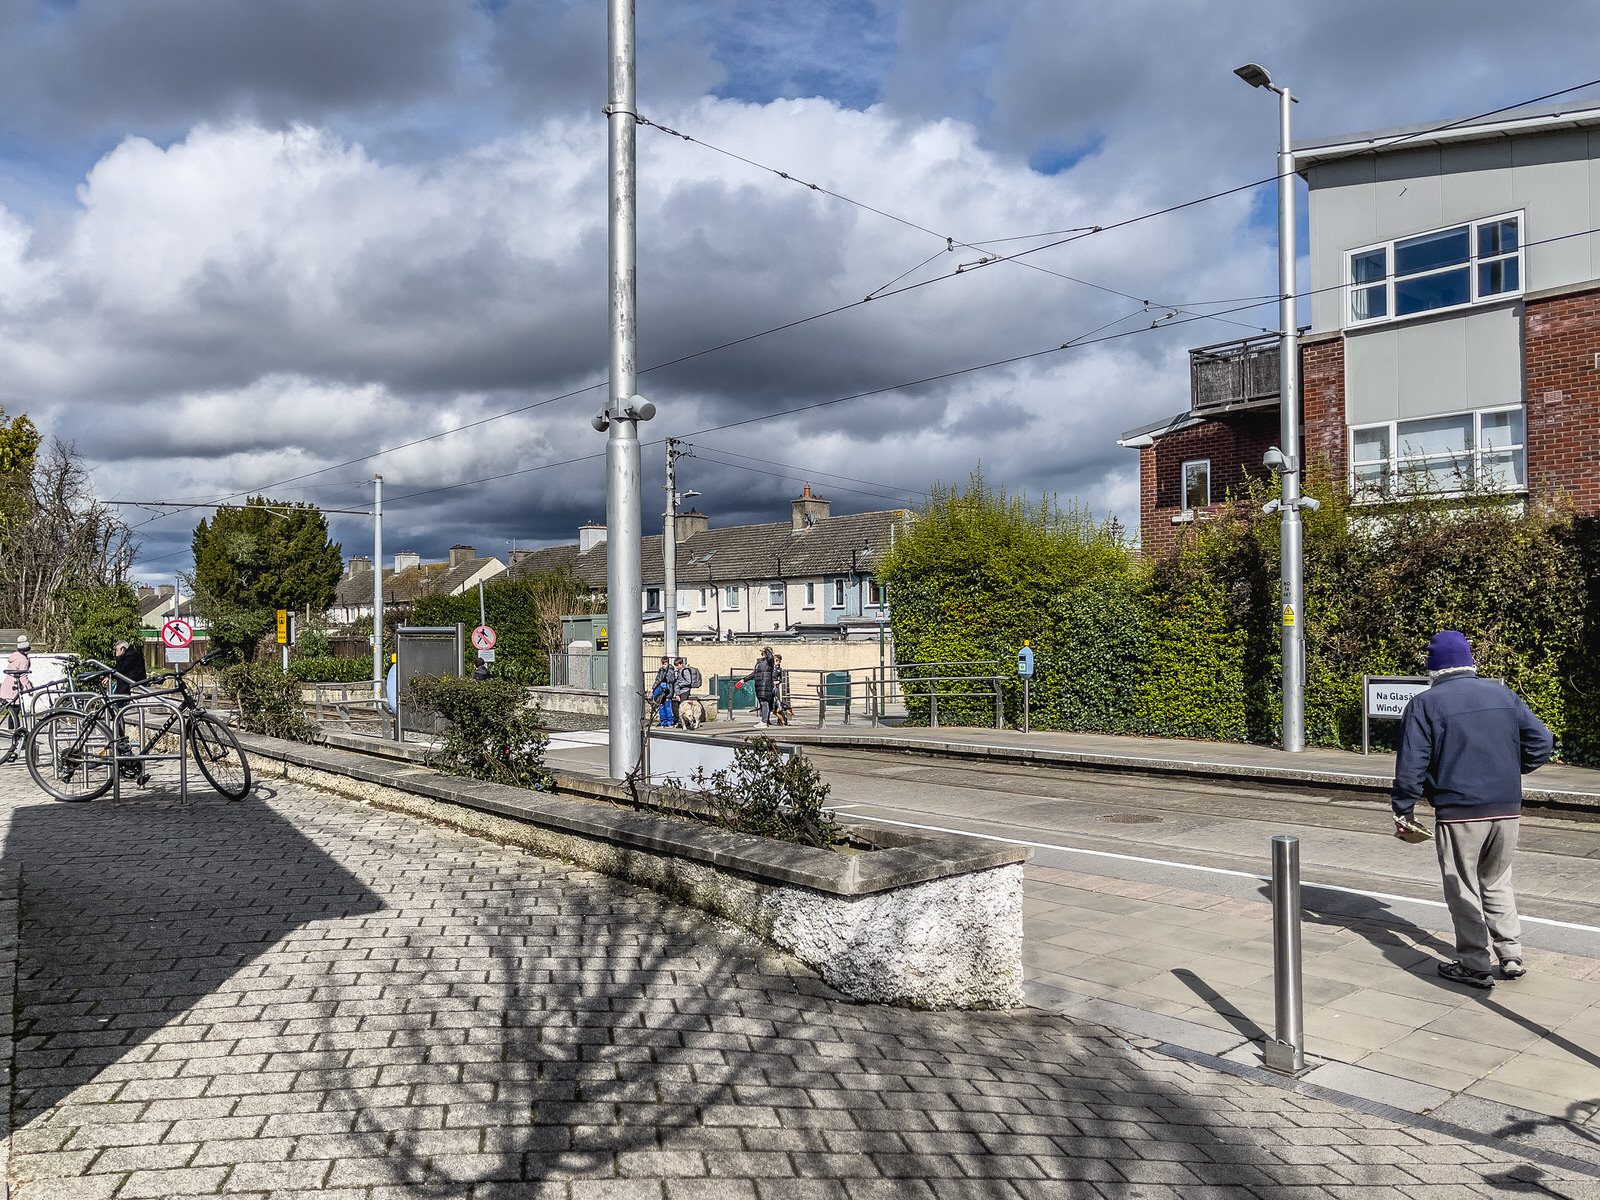 THE LUAS TRAM STOP AT WINDY ARBOUR AND THE IMMEDIATE AREA 038